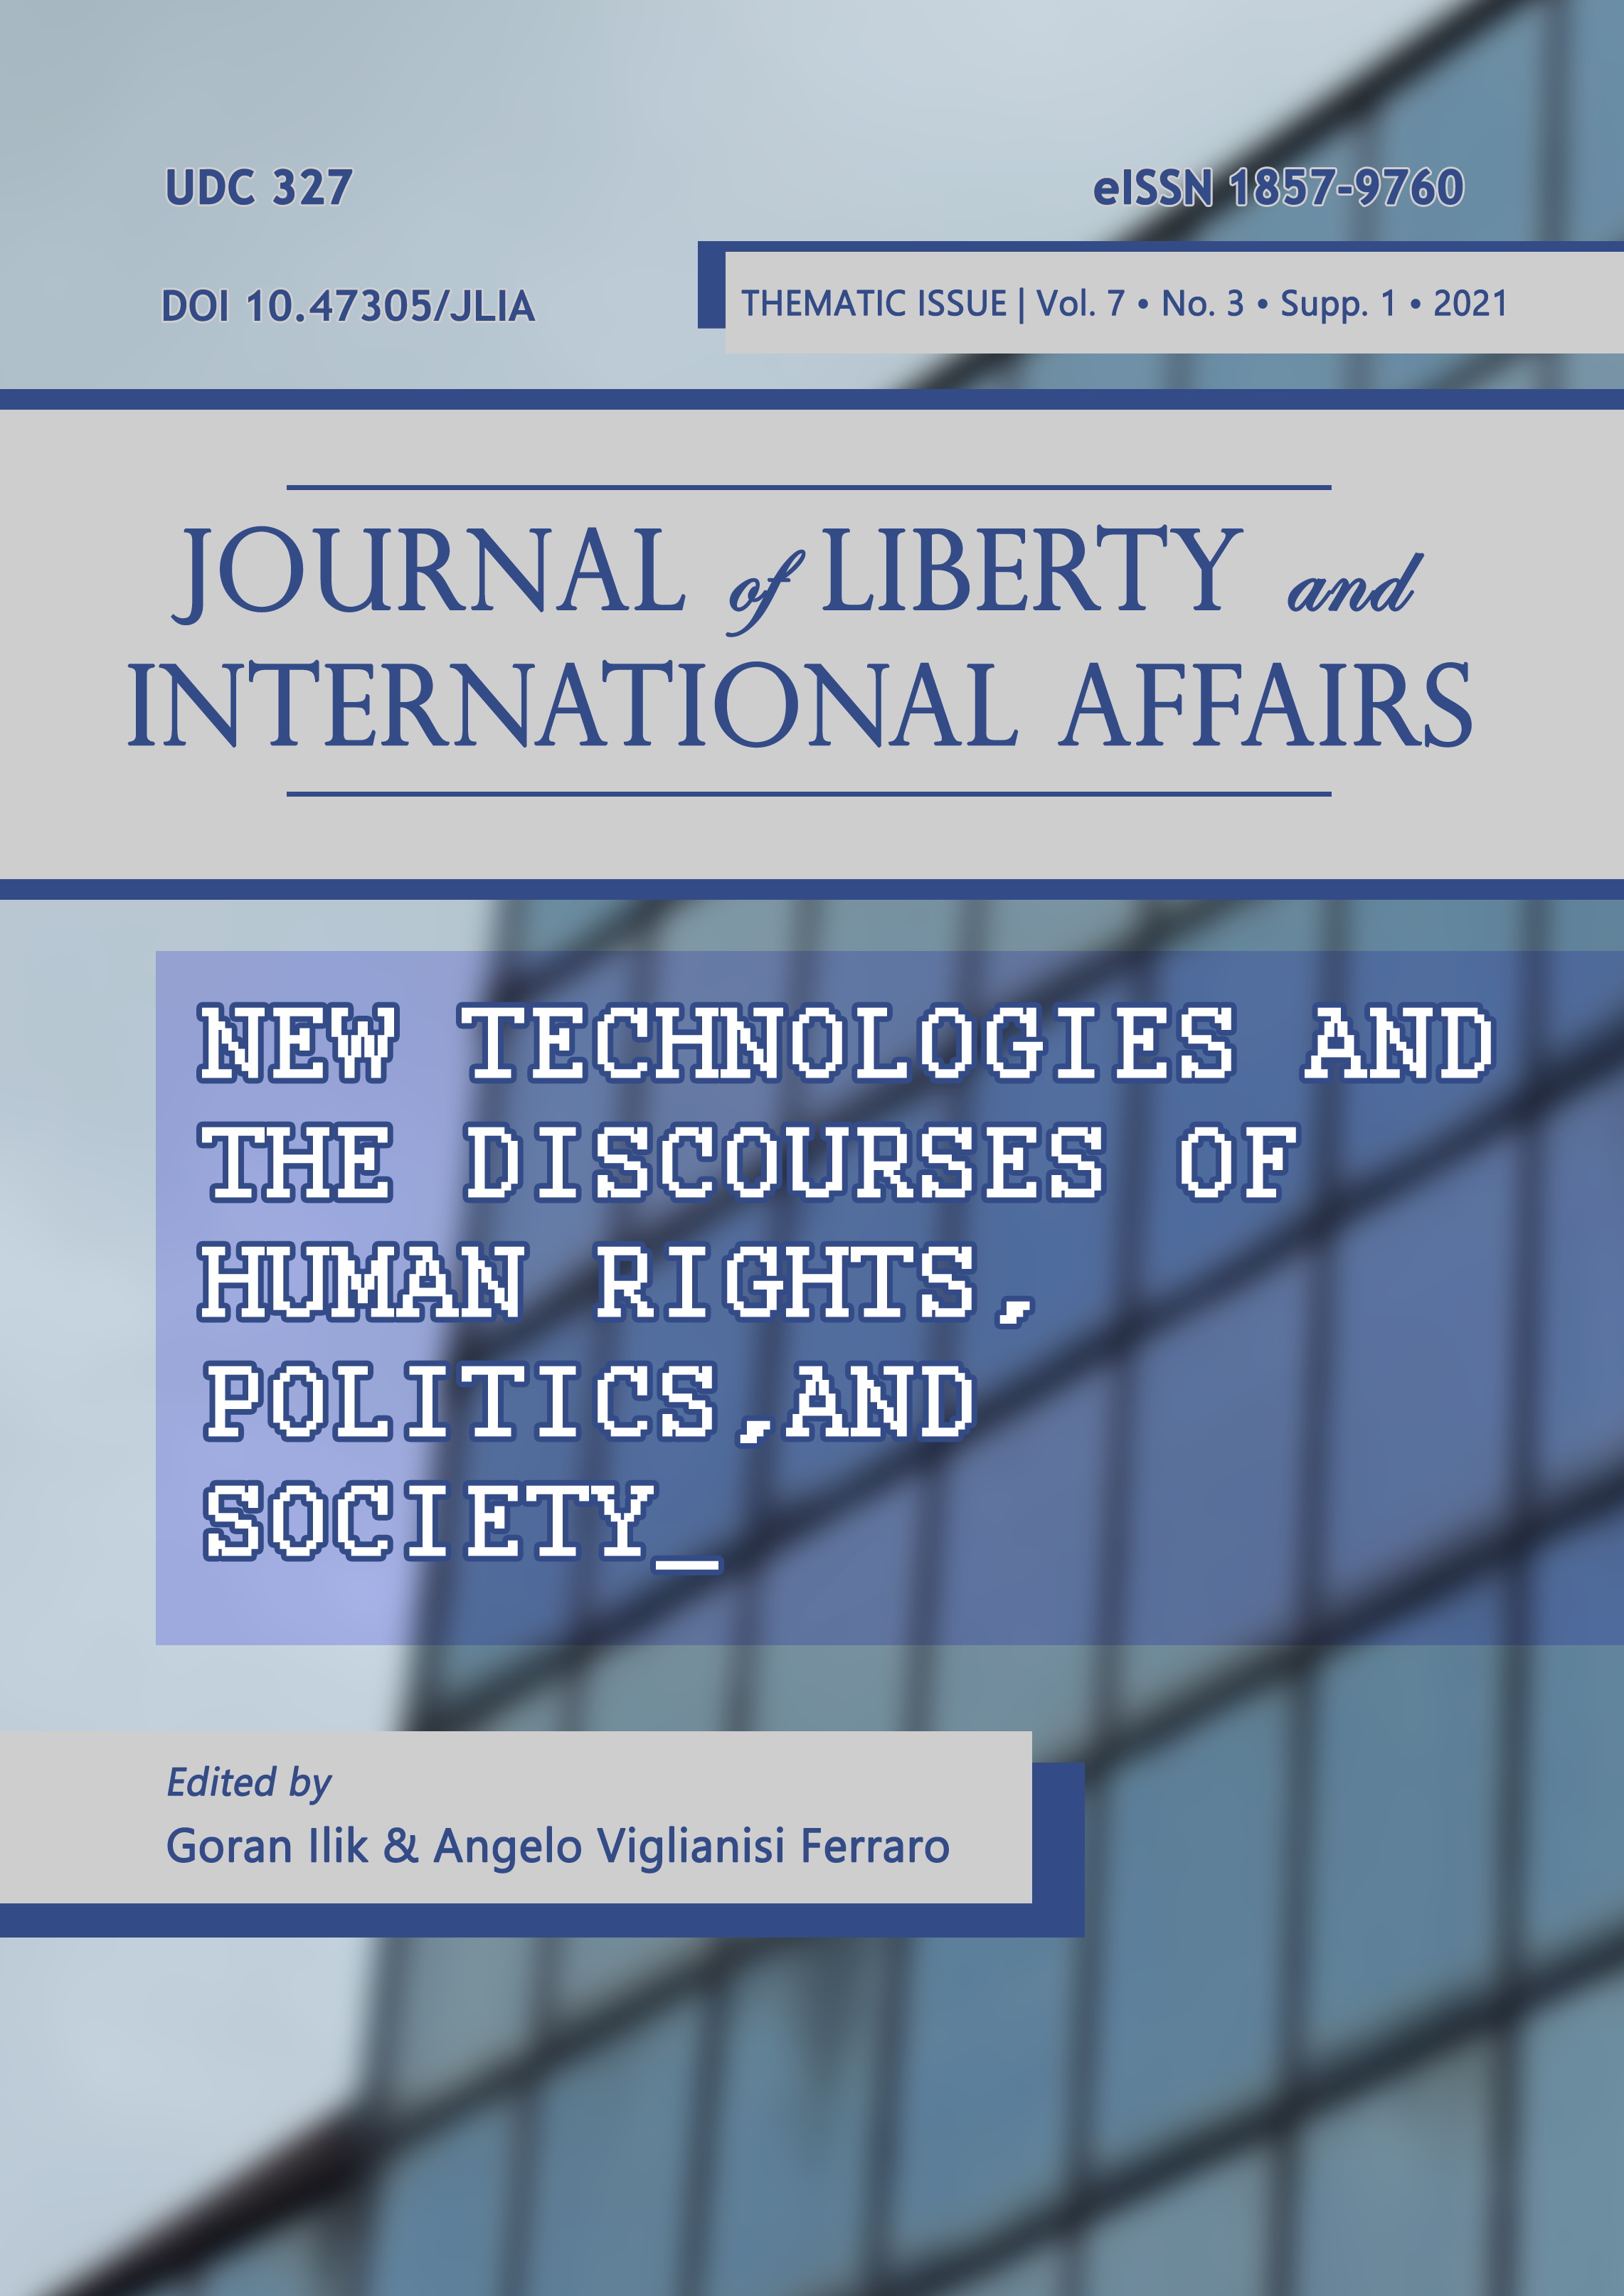 NEW TECHNOLOGIES AND THE DISCOURSES OF HUMAN RIGHTS, POLITICS, AND SOCIETY Cover Image